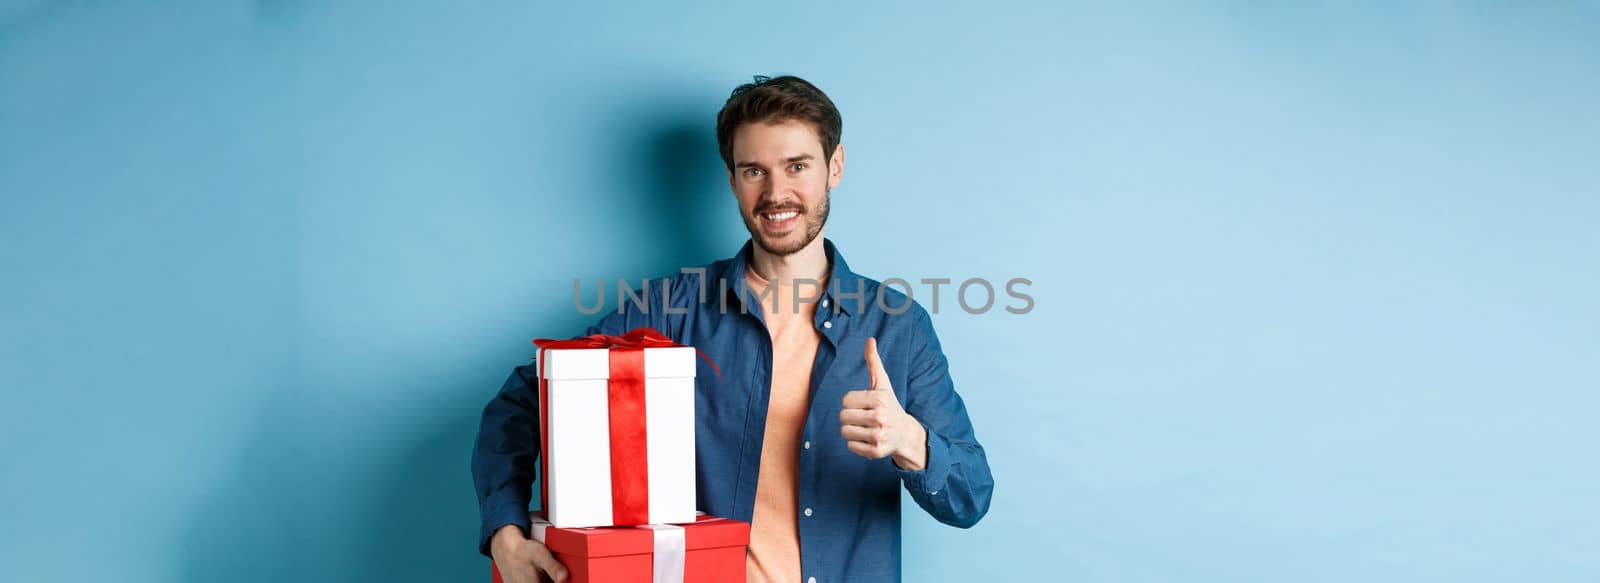 Smiling man holding romantic gifts and showing thumbs-up, celebrating Valentines day, buying presents for lover, standing over blue background.